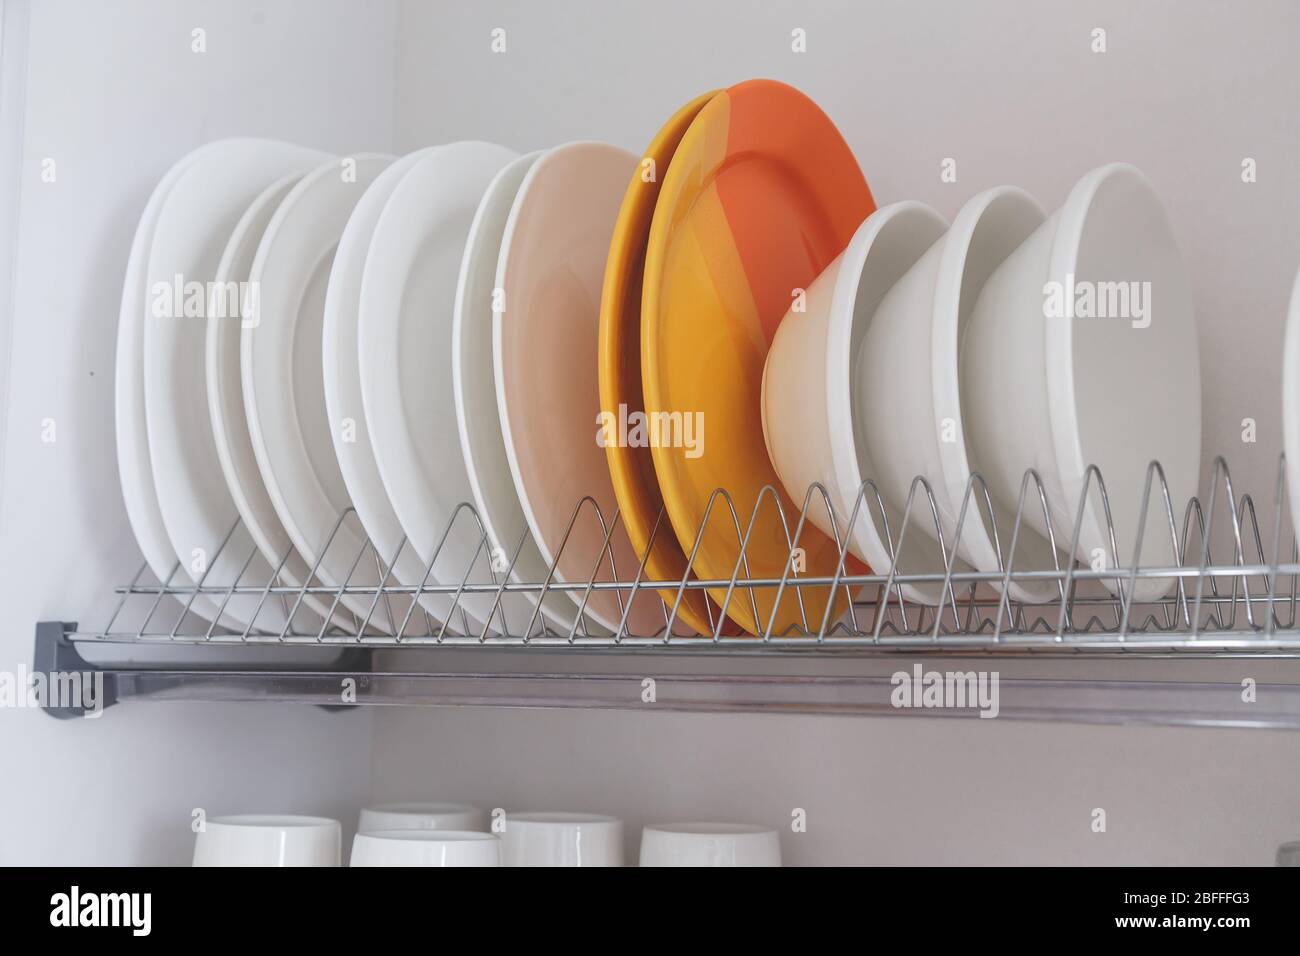 https://c8.alamy.com/comp/2BFFFG3/dish-drying-metal-rack-with-big-nice-white-clean-kitchenware-traditional-wall-cabinet-kitchen-2BFFFG3.jpg